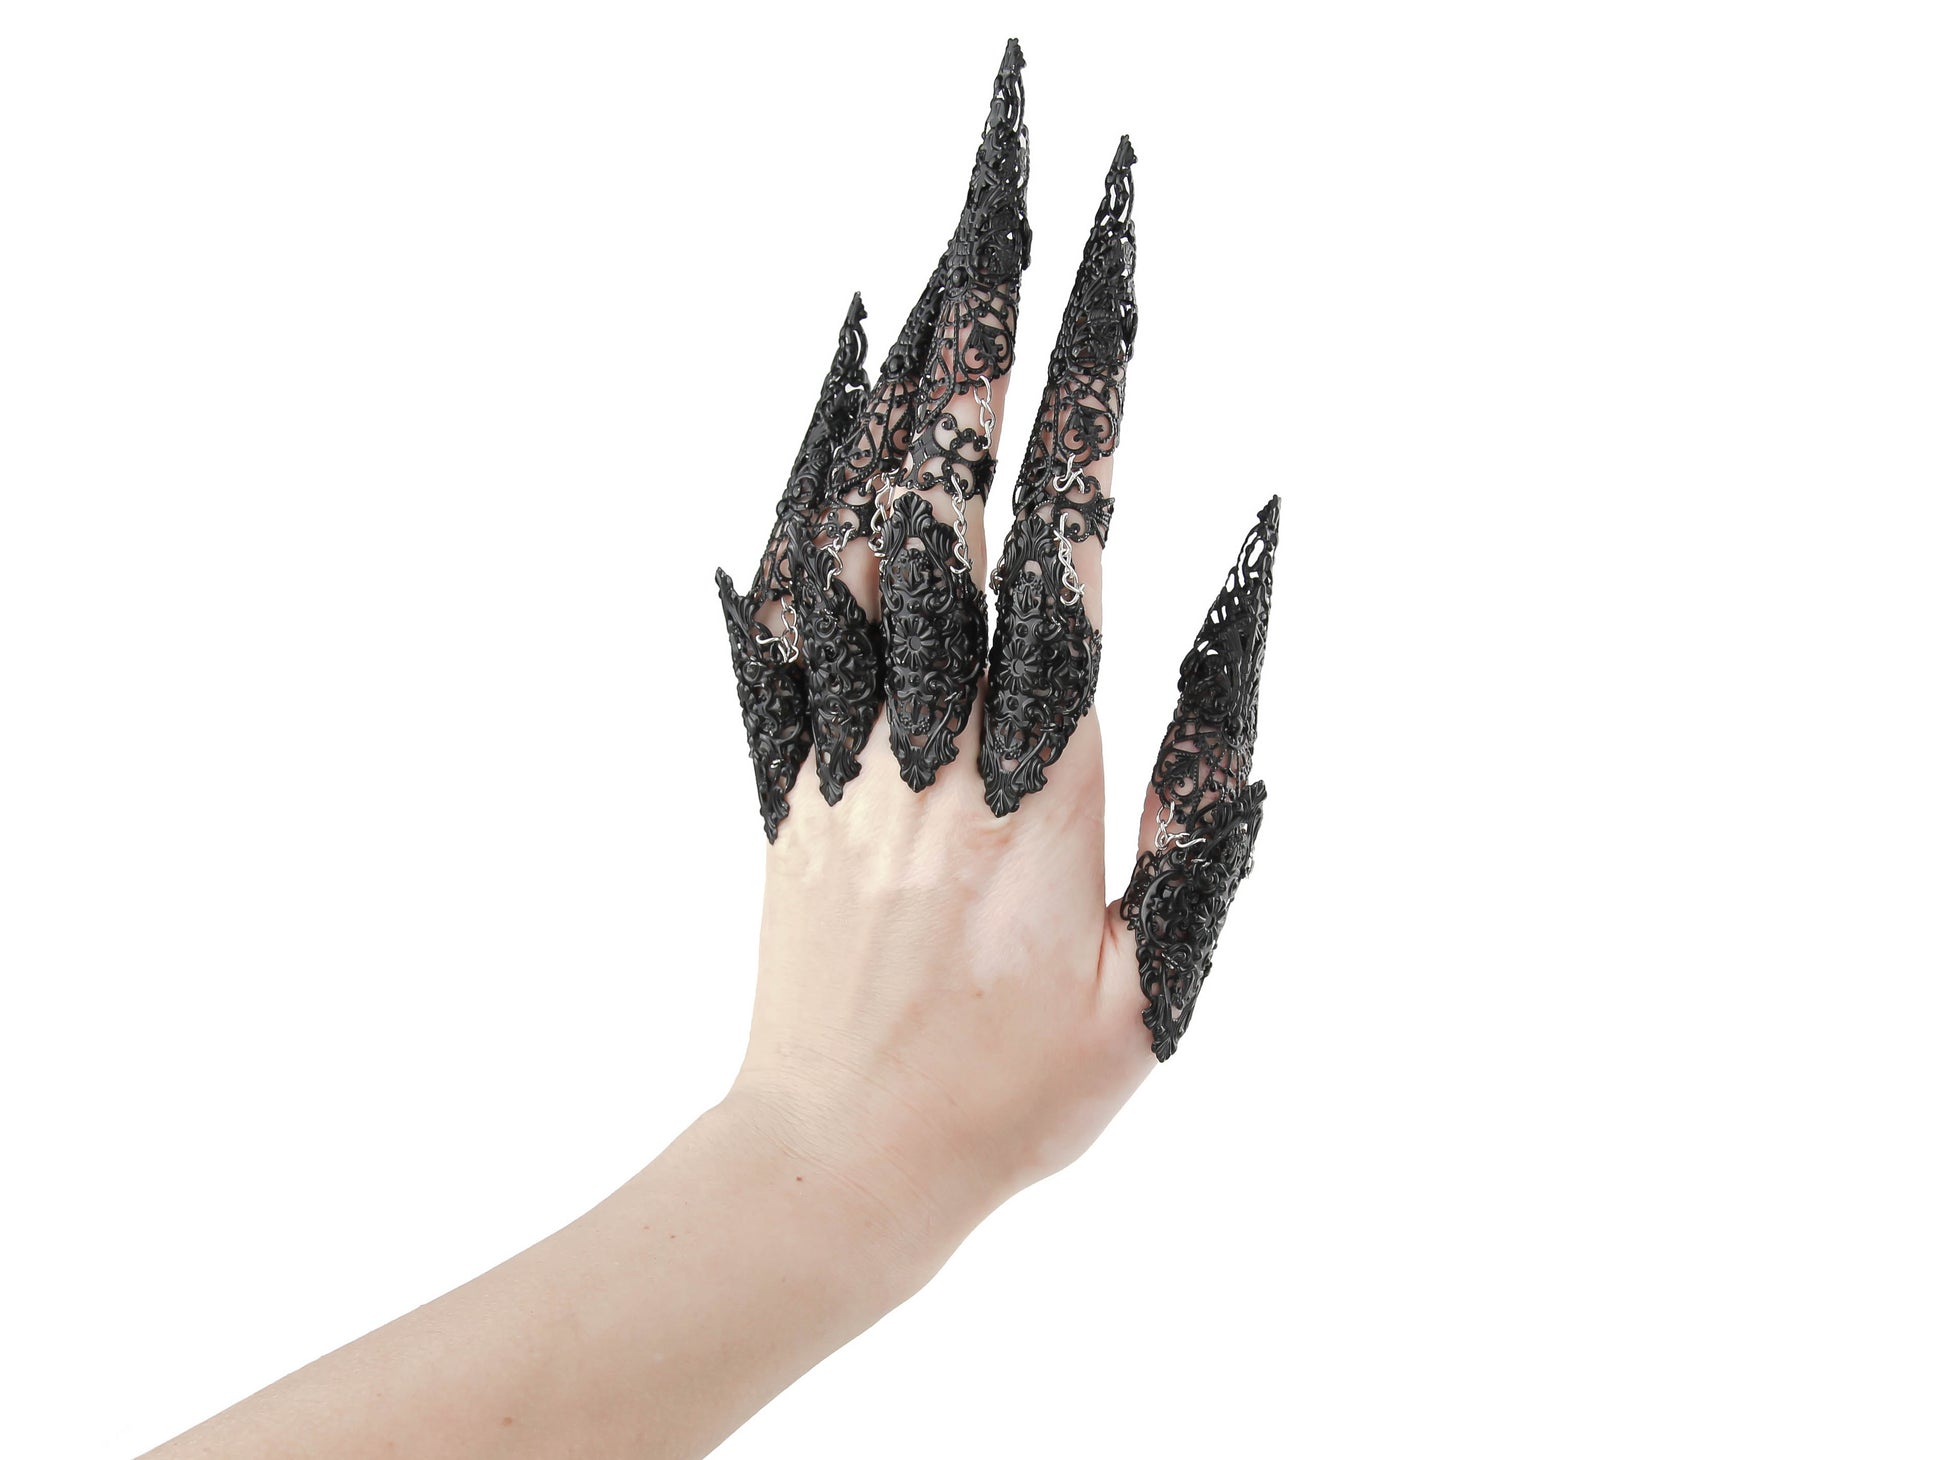 A hand adorned with Myril Jewels' gothic black full finger rings featuring long claws, showcasing a dramatic neo-goth aesthetic suitable for Halloween, witchcore styles, or as a bold statement piece for everyday wear